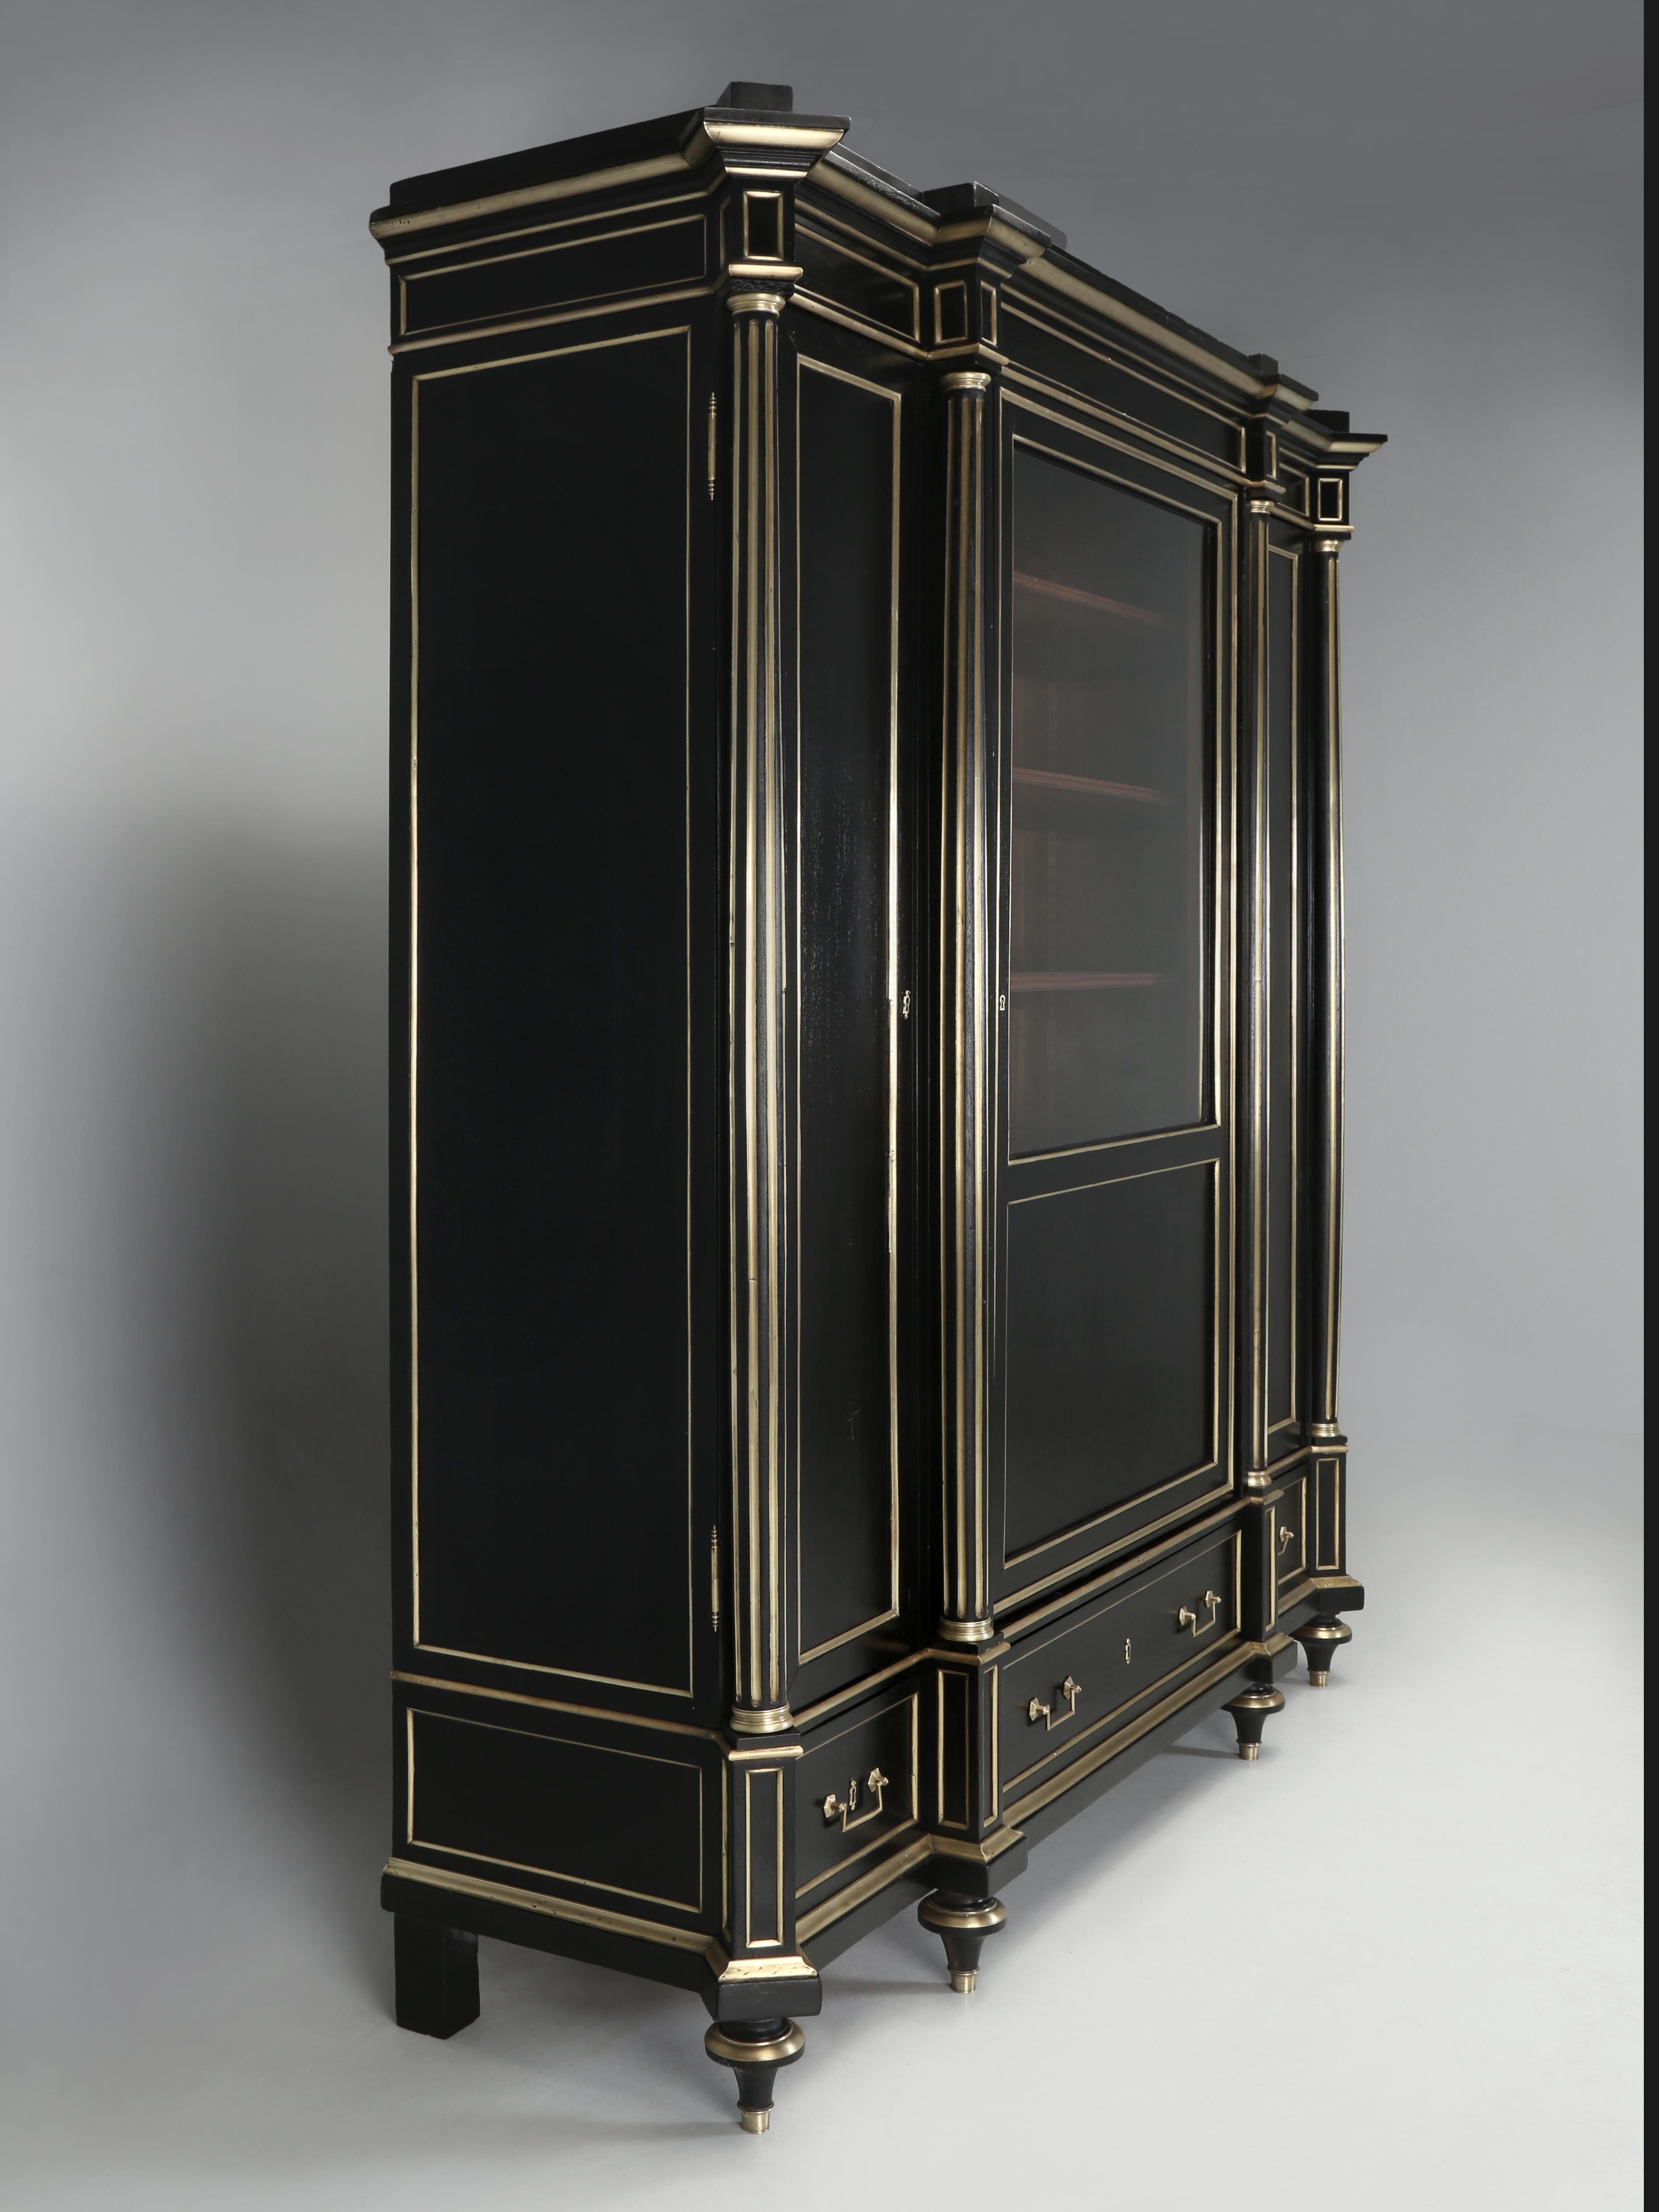 
Antique French Louis XVI Style Bookcase, or if you prefer, Antique French Ebonized Bibliotheque made from solid mahogany over 100-years ago to a very high standard. We have had our share of antique, or supposed to be Antique French mahogany Louis